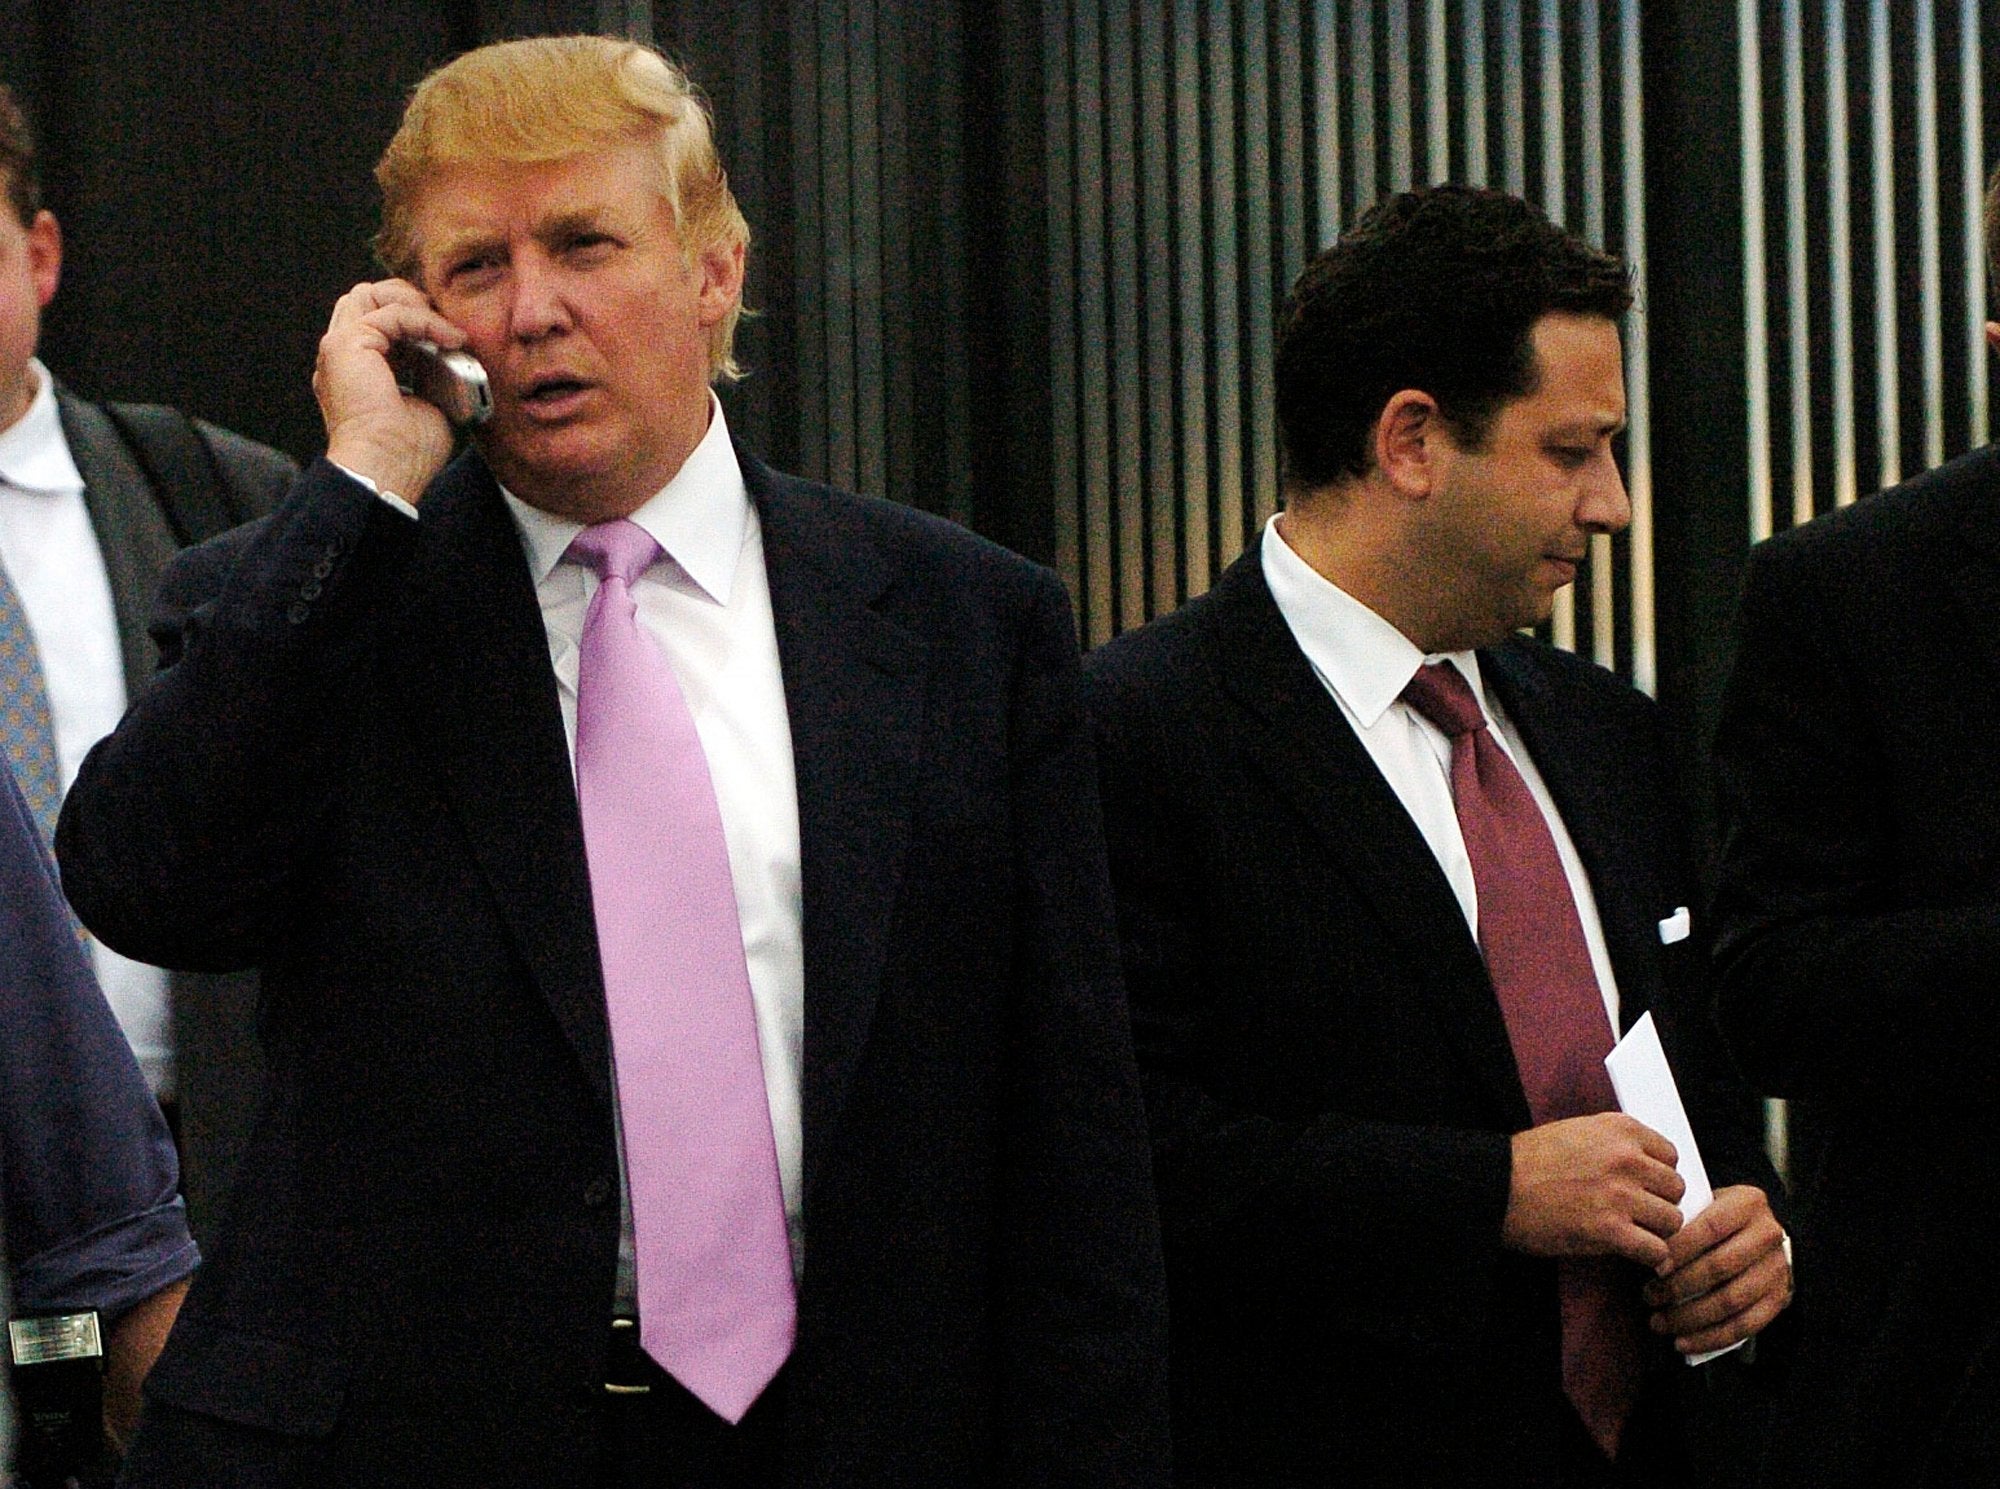 Donald Trump, left, with Felix Sater, right,in this 14 September, 2005